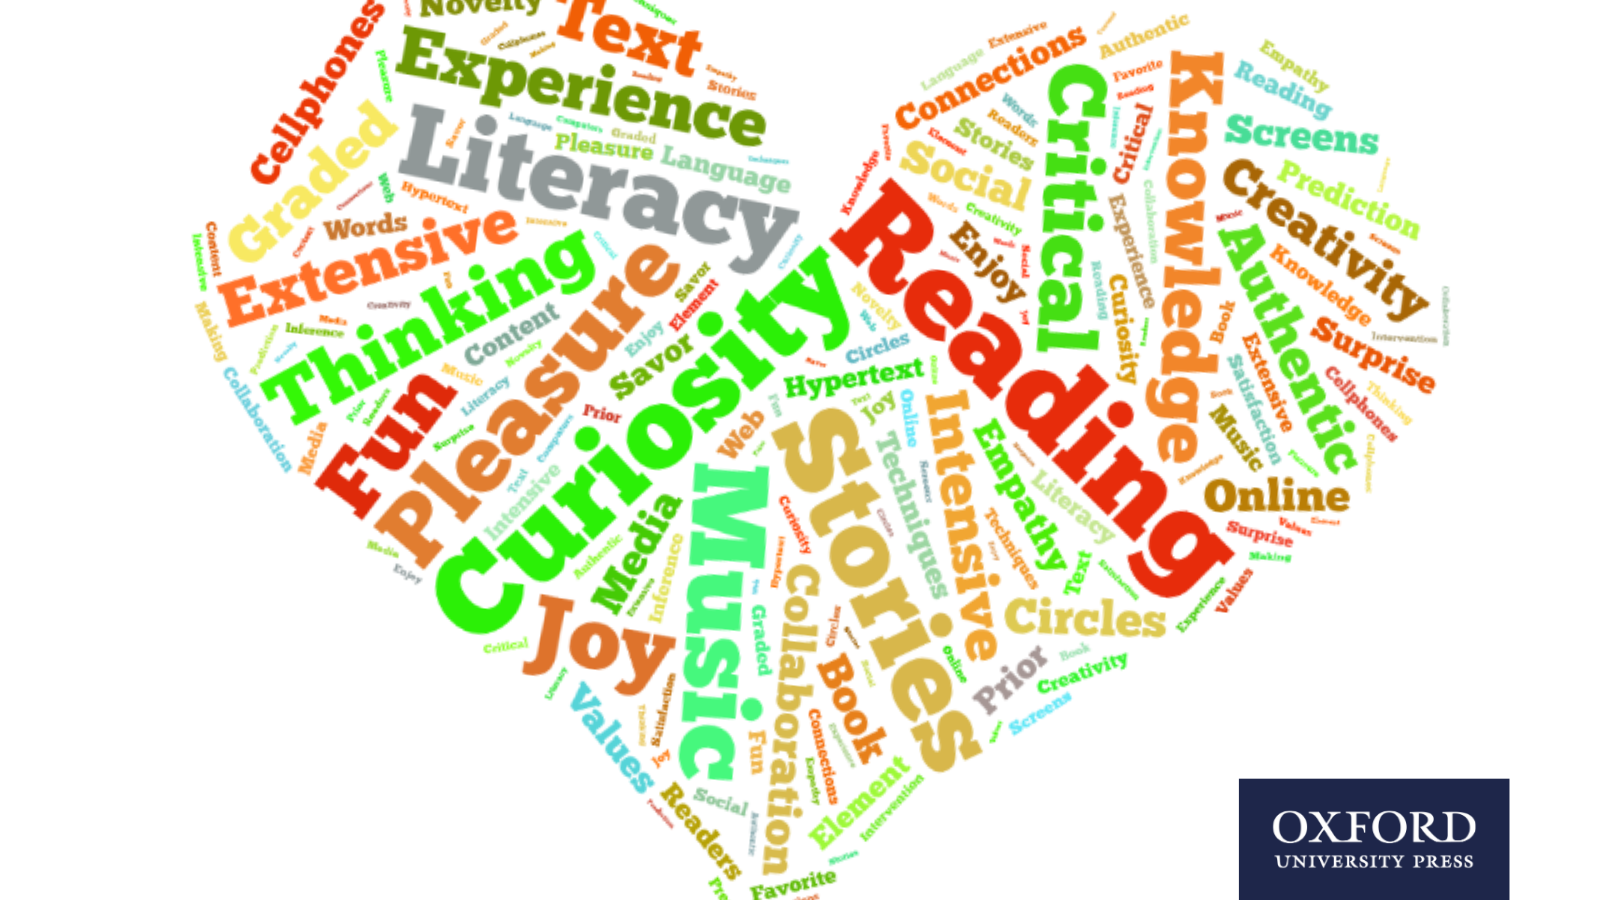 A word cloud of words related to reading